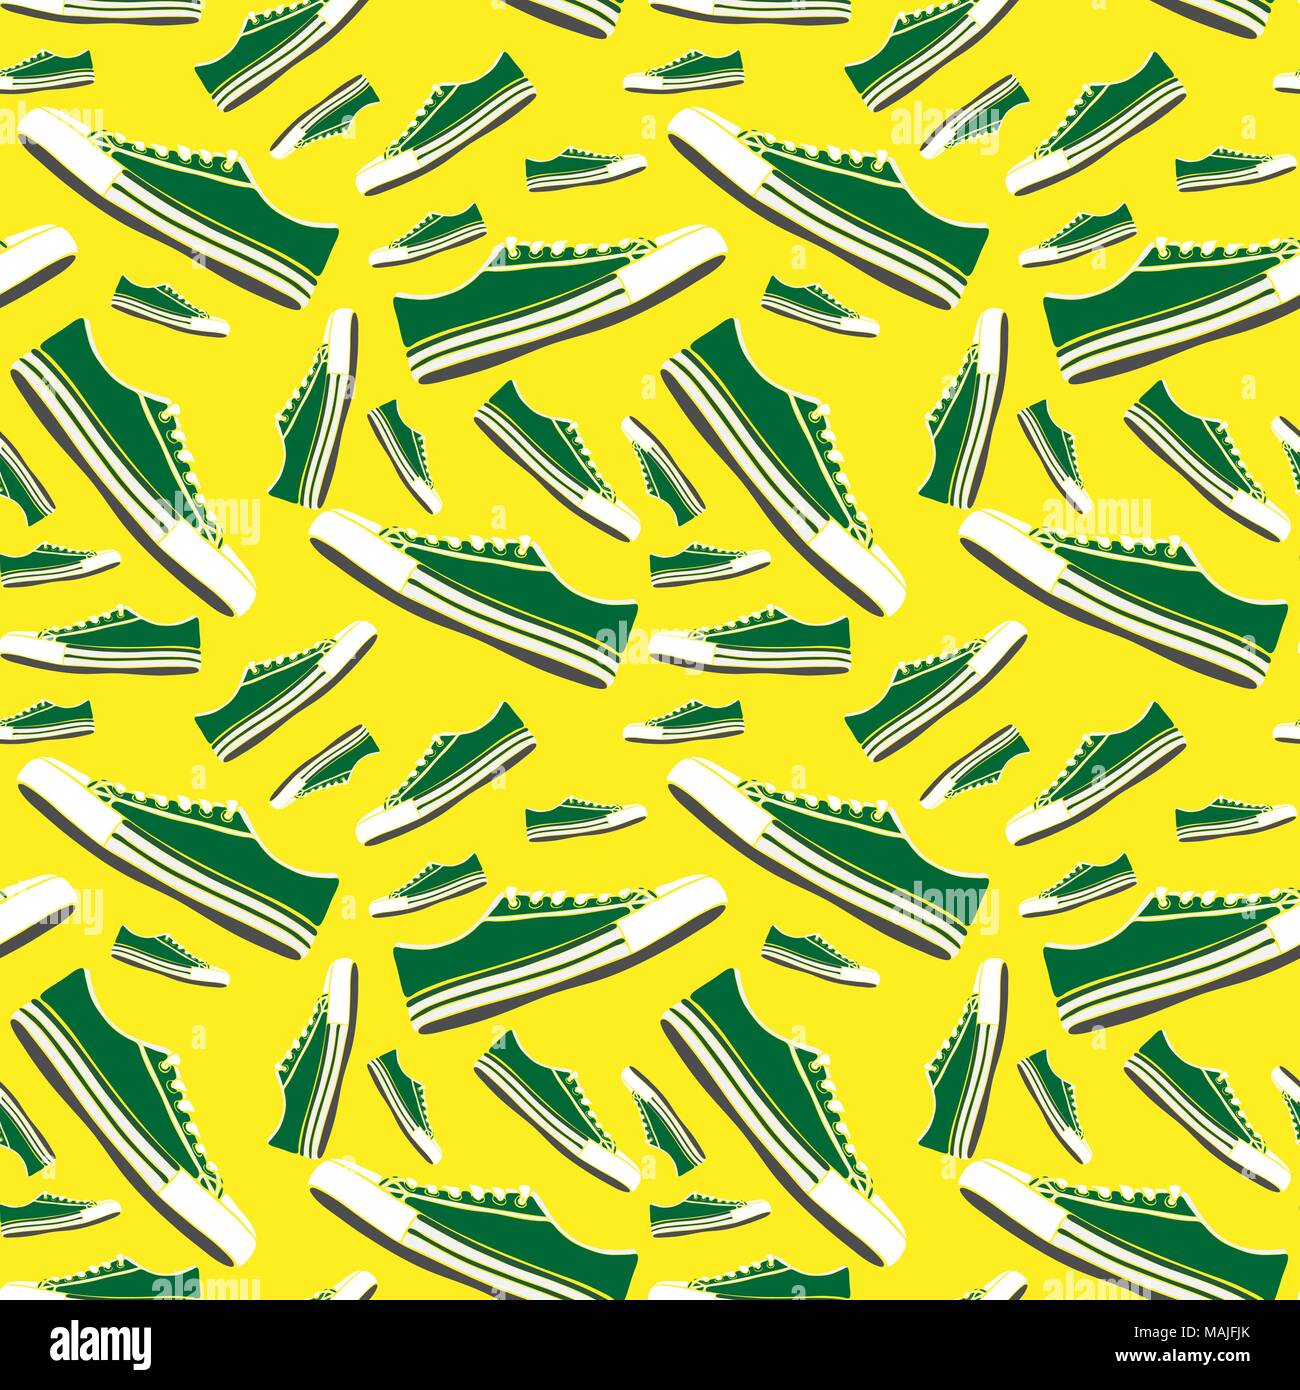 green sneakers of different sizes on a yellow background, seamless ...